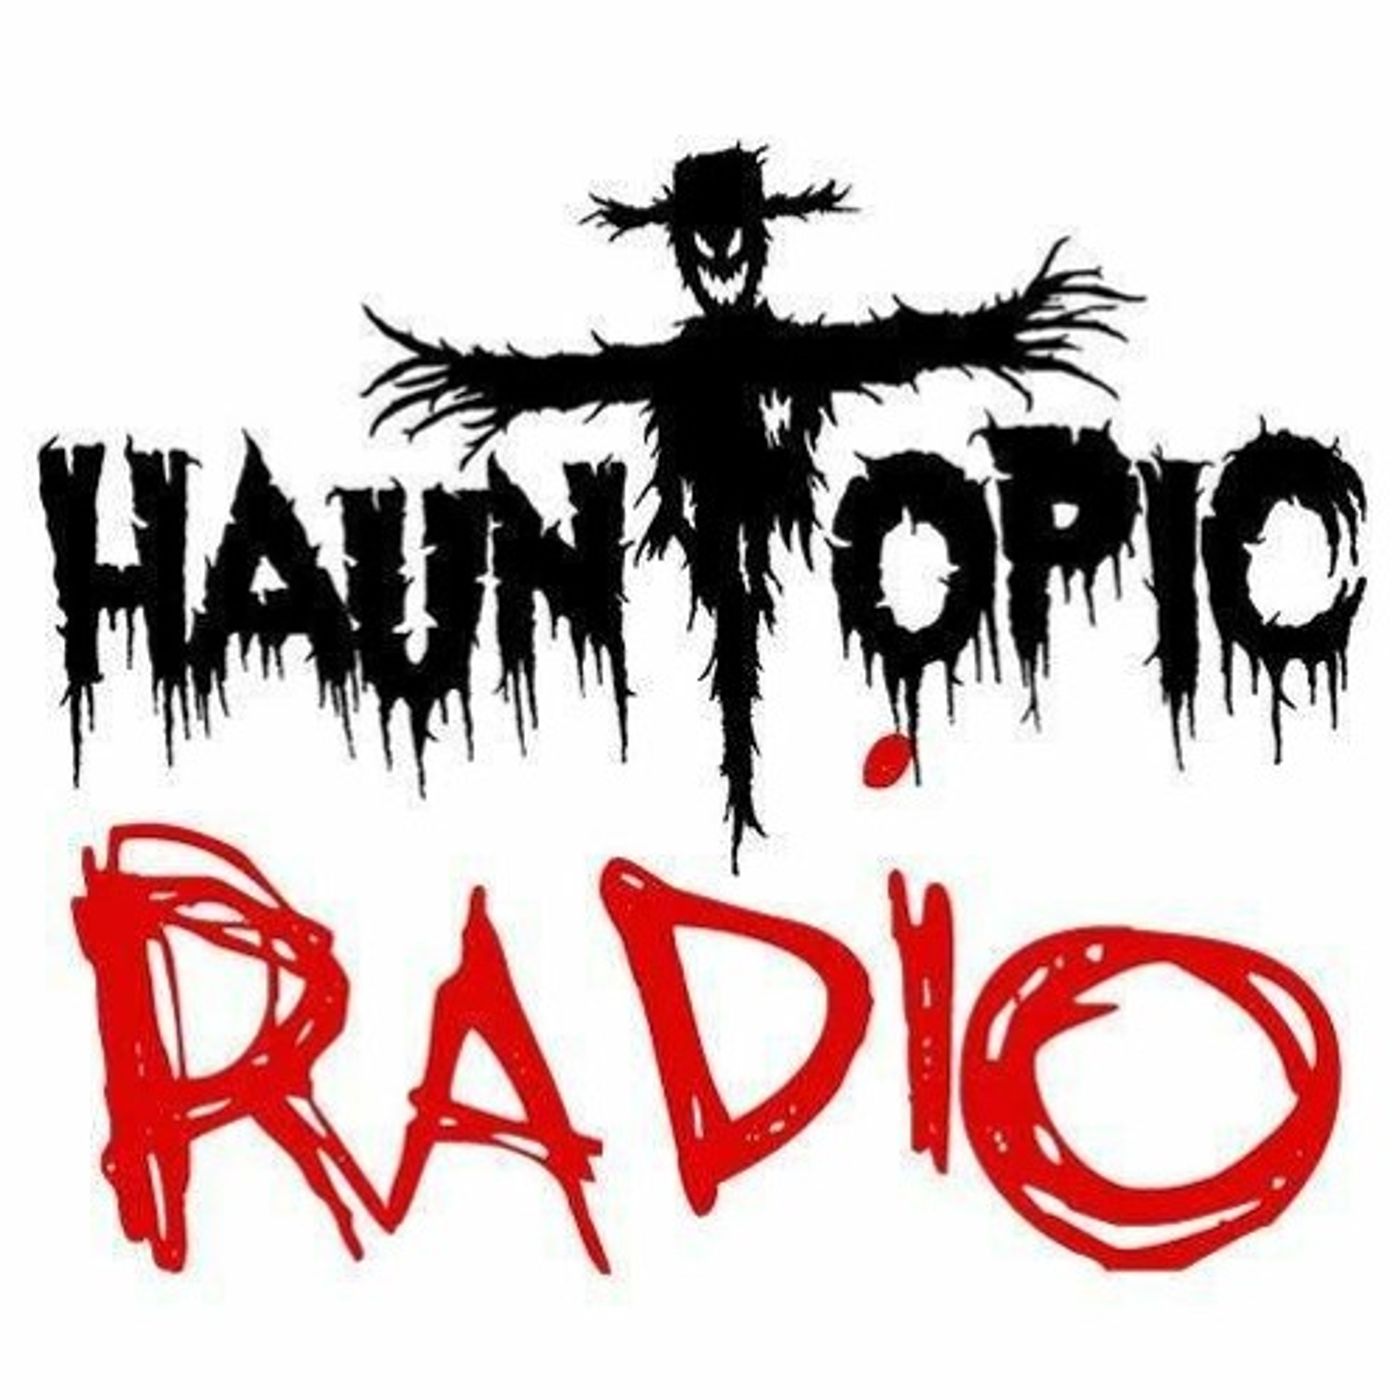 [HaunTopic] Marketing Your Haunted Attraction After a Pandemic